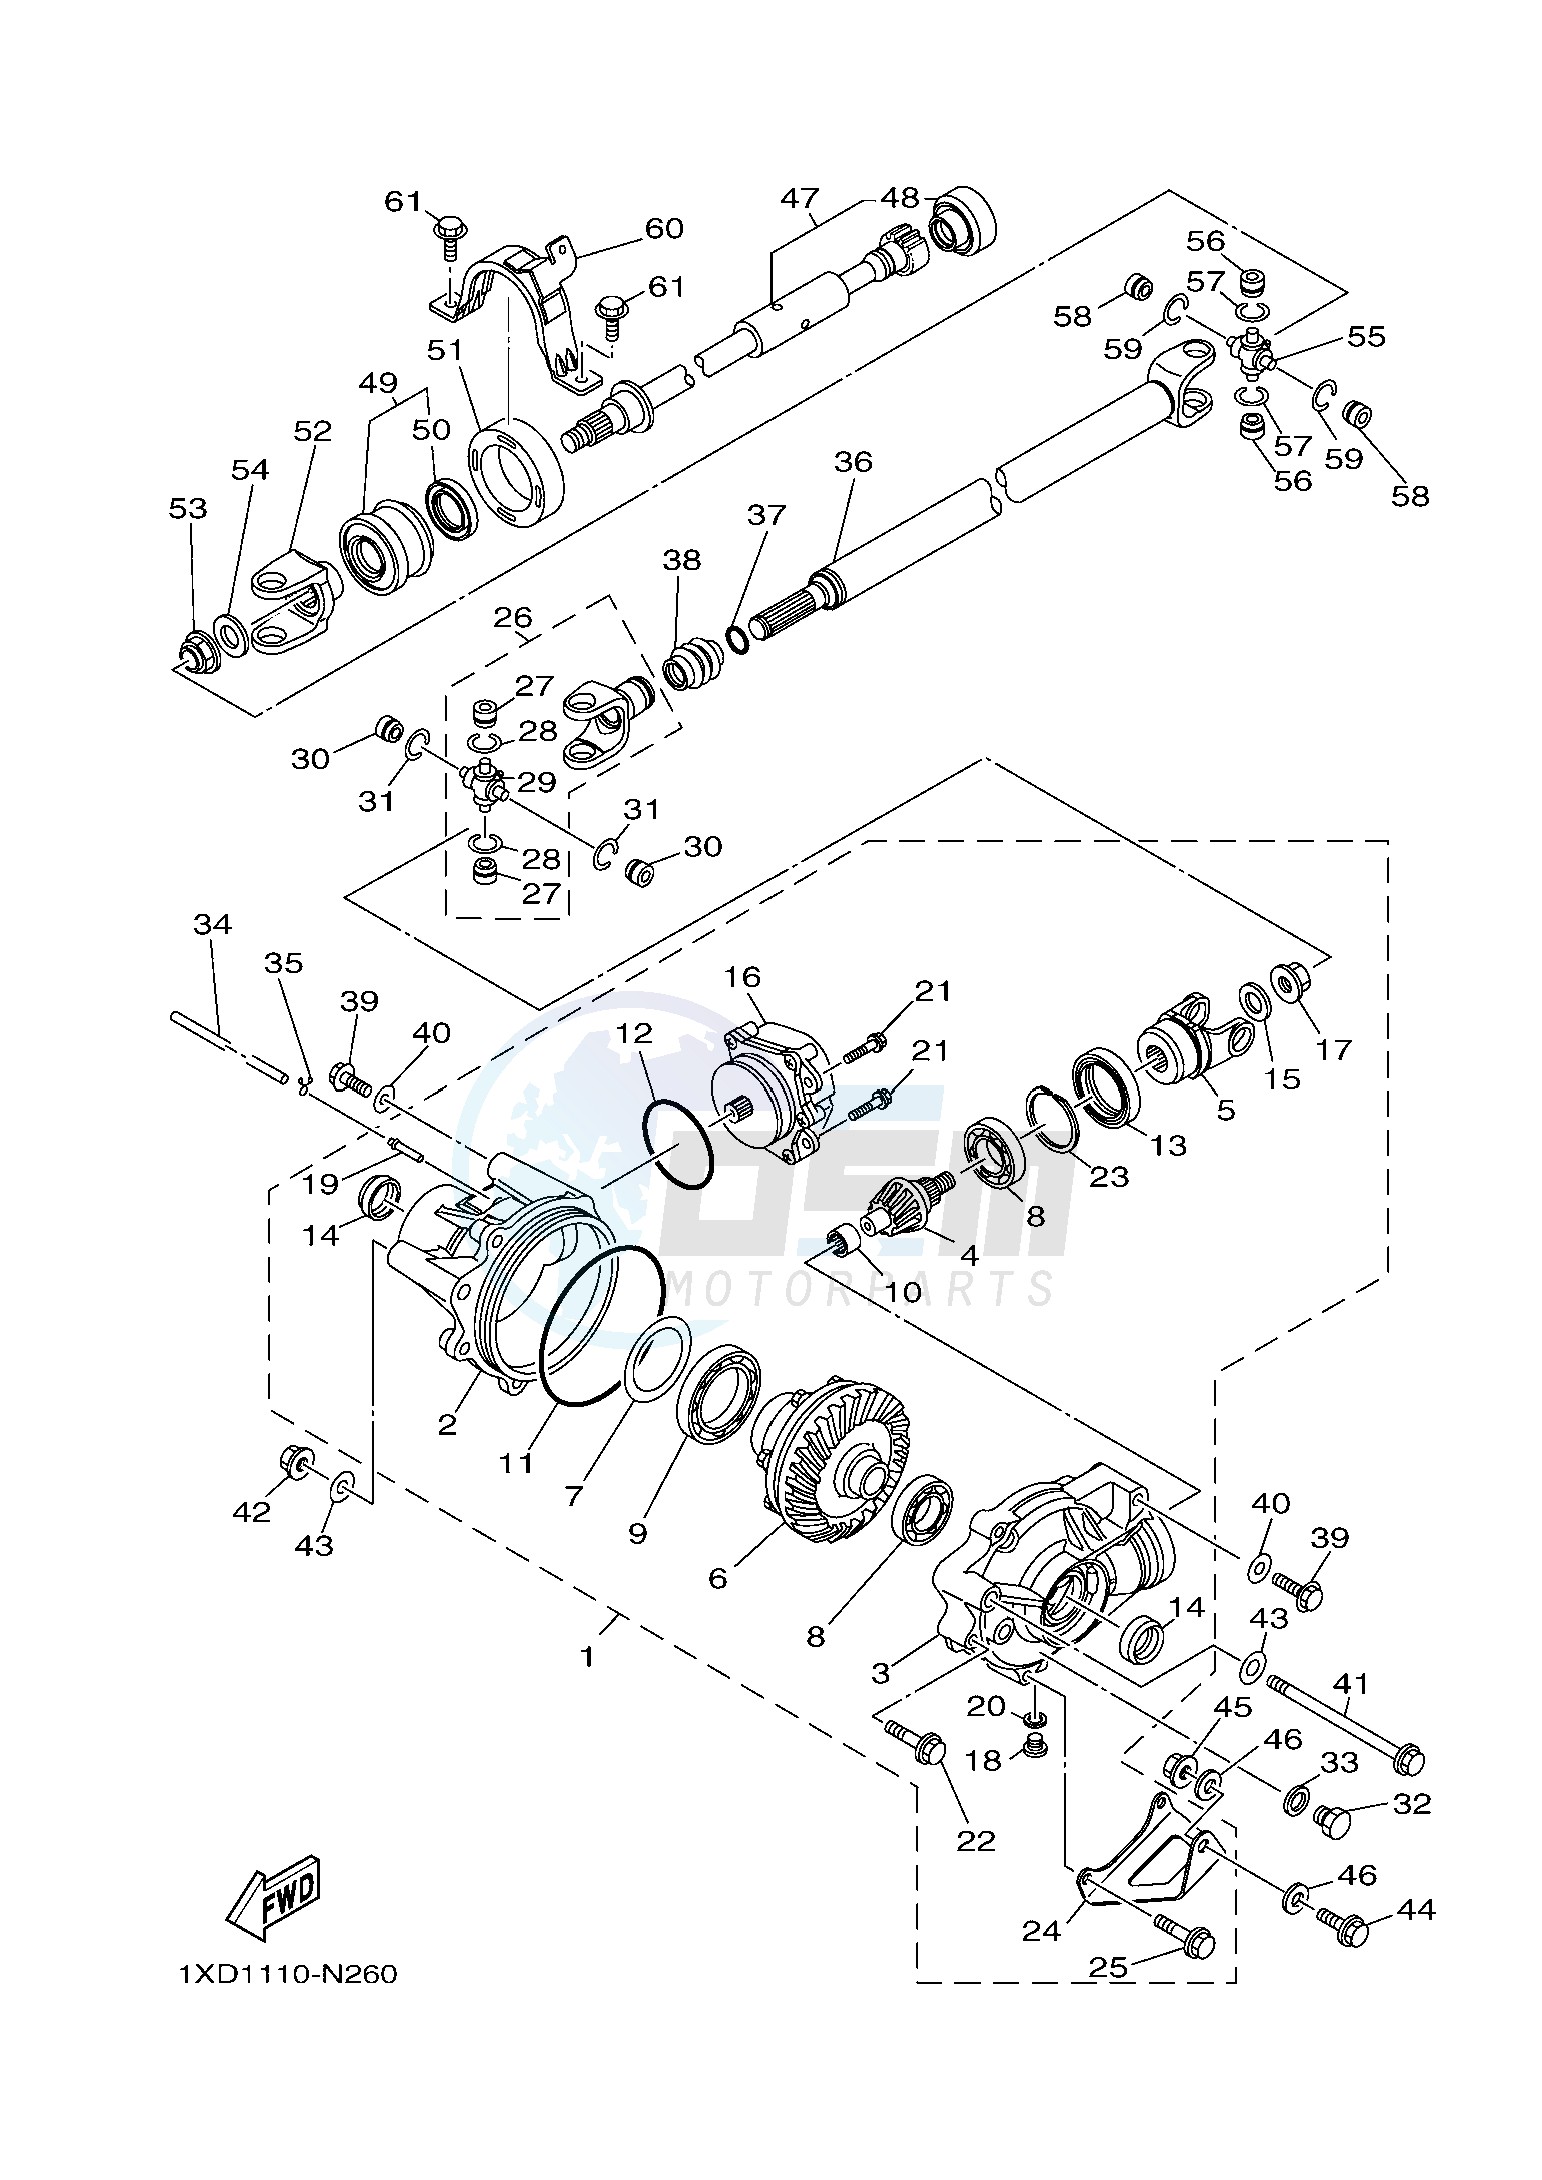 FRONT DIFFERENTIAL blueprint